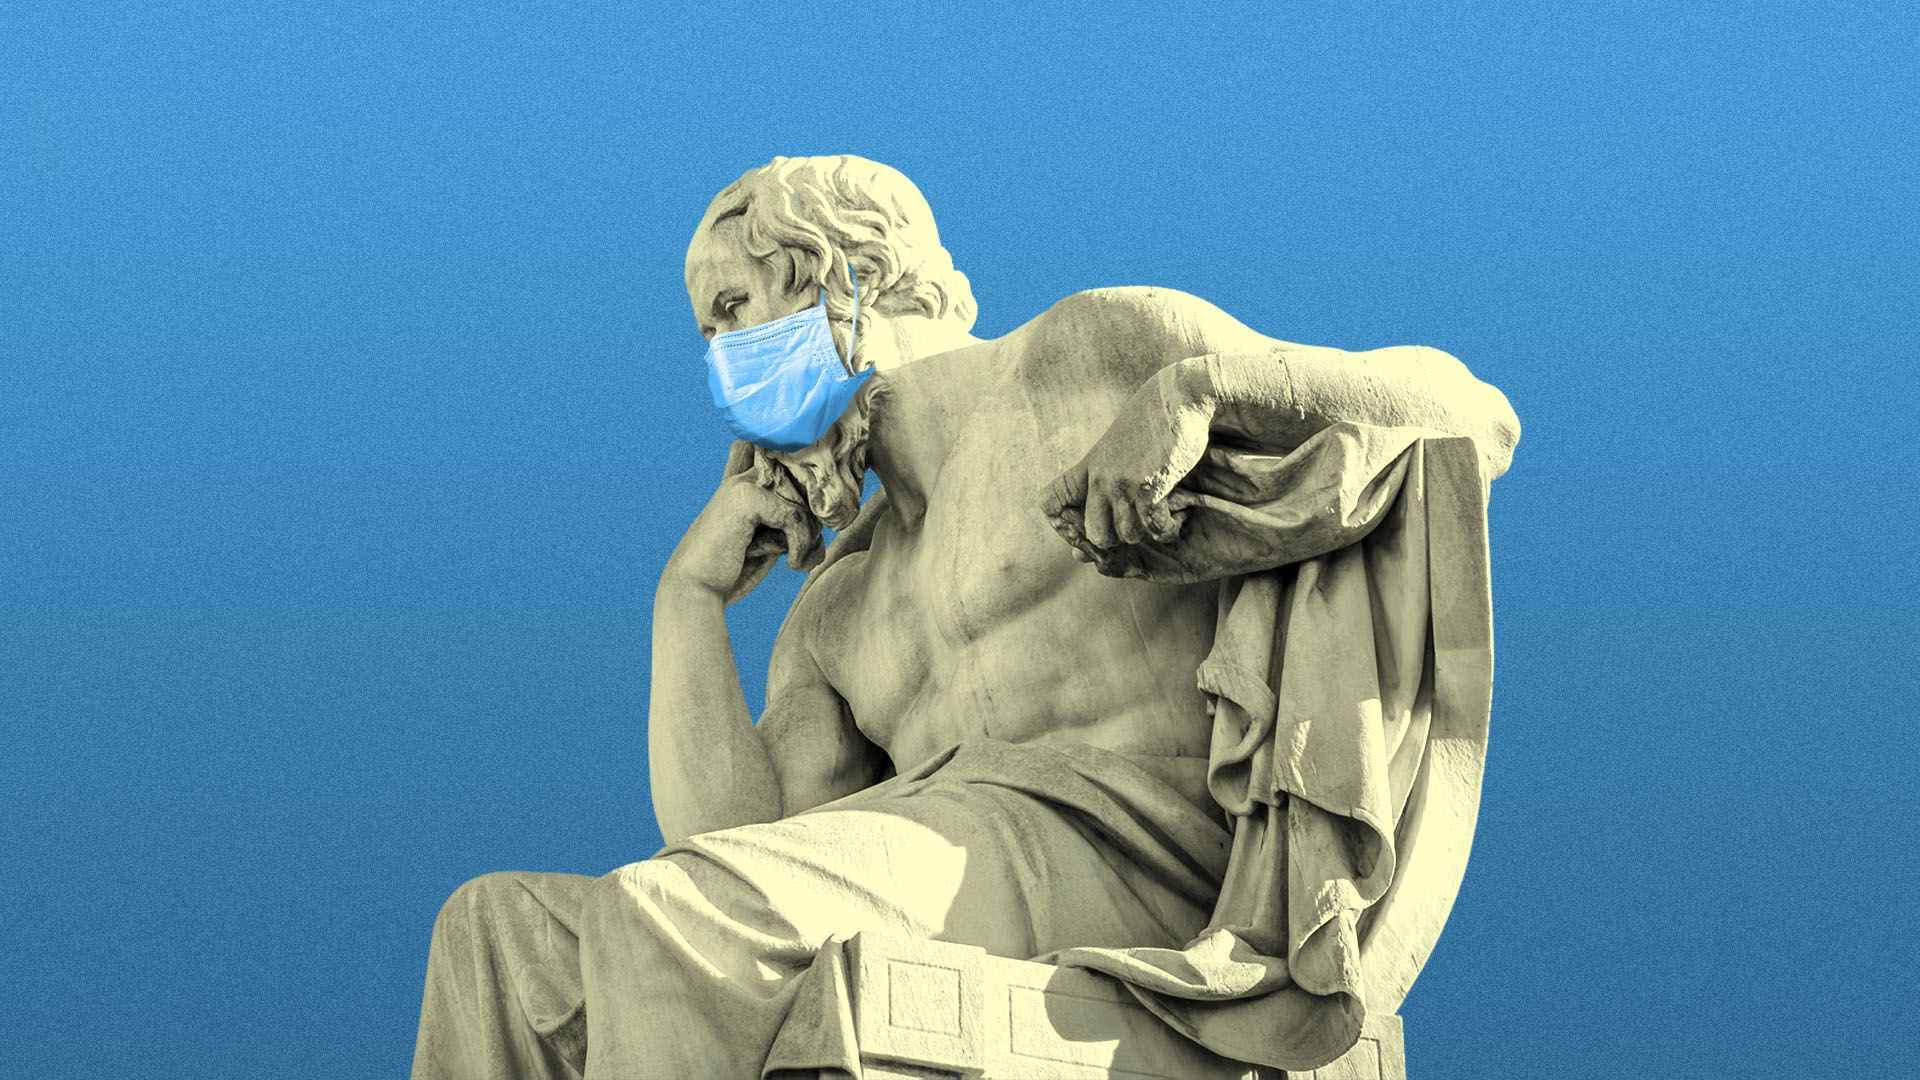 Illustration of the Greek statue of a thinking Socrates with a medical mask on